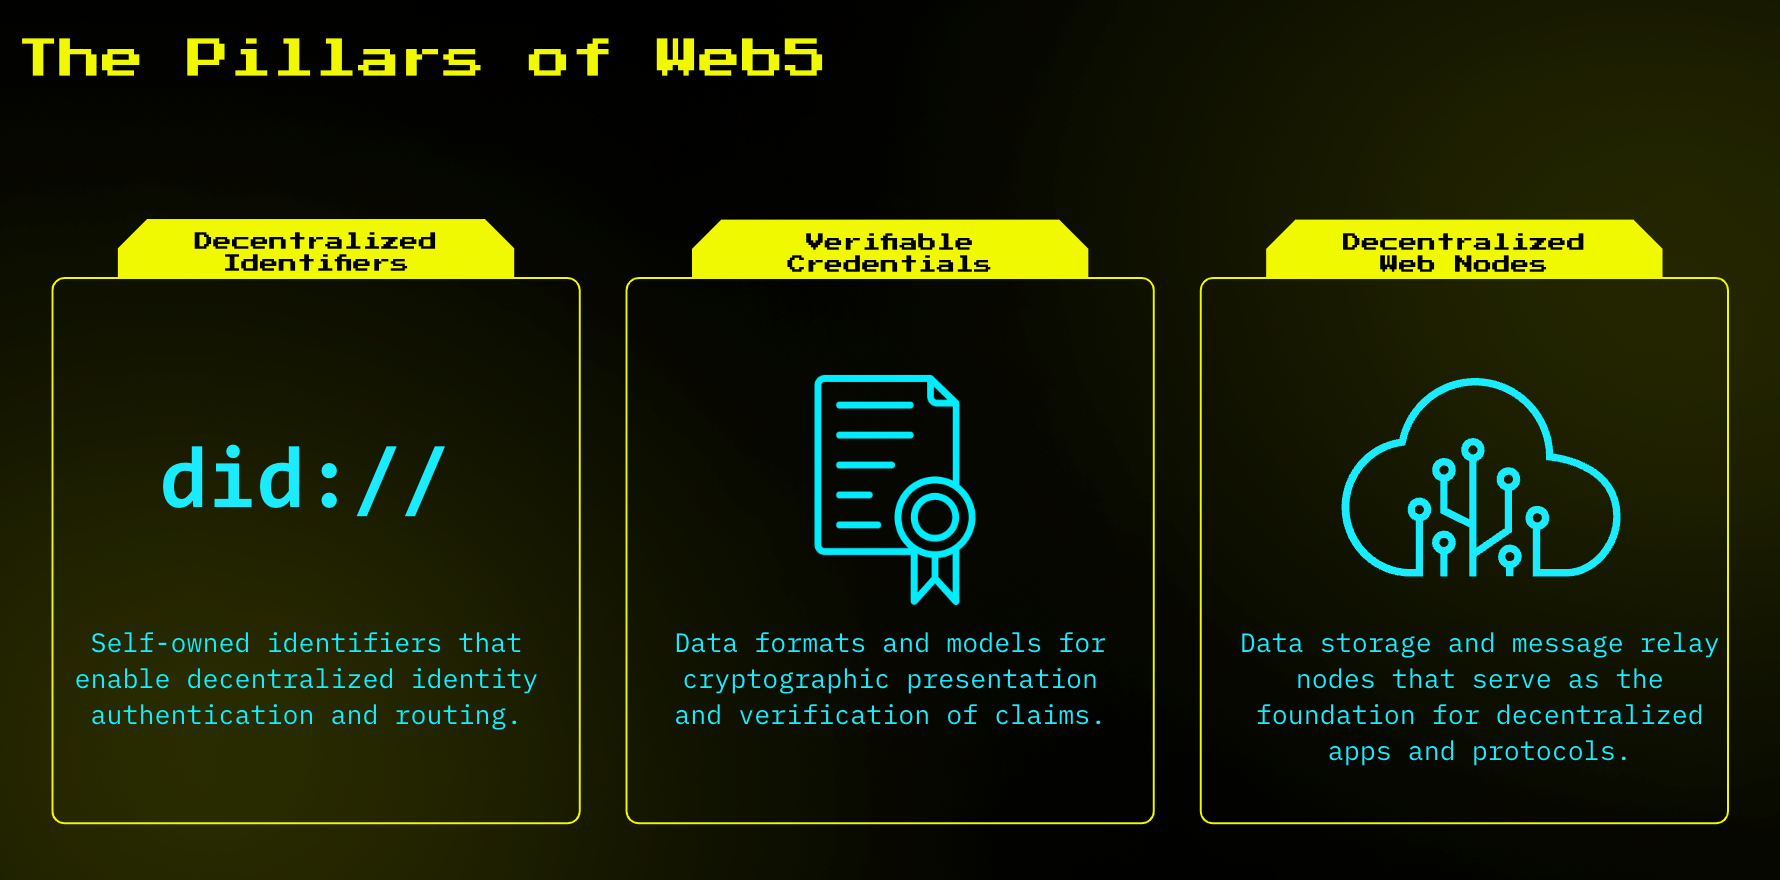 The pillars of Web5 are Decentralized Identifiers (self-owned identifiers that enable decentralized identity authentication and routing), Verifiable Credentials (data formats and models for cryptographic presentation and verification of claims), and Decentralized Web Nodes (data storage and message relay nodes that serve as the foundation for decentralized apps and protocols).